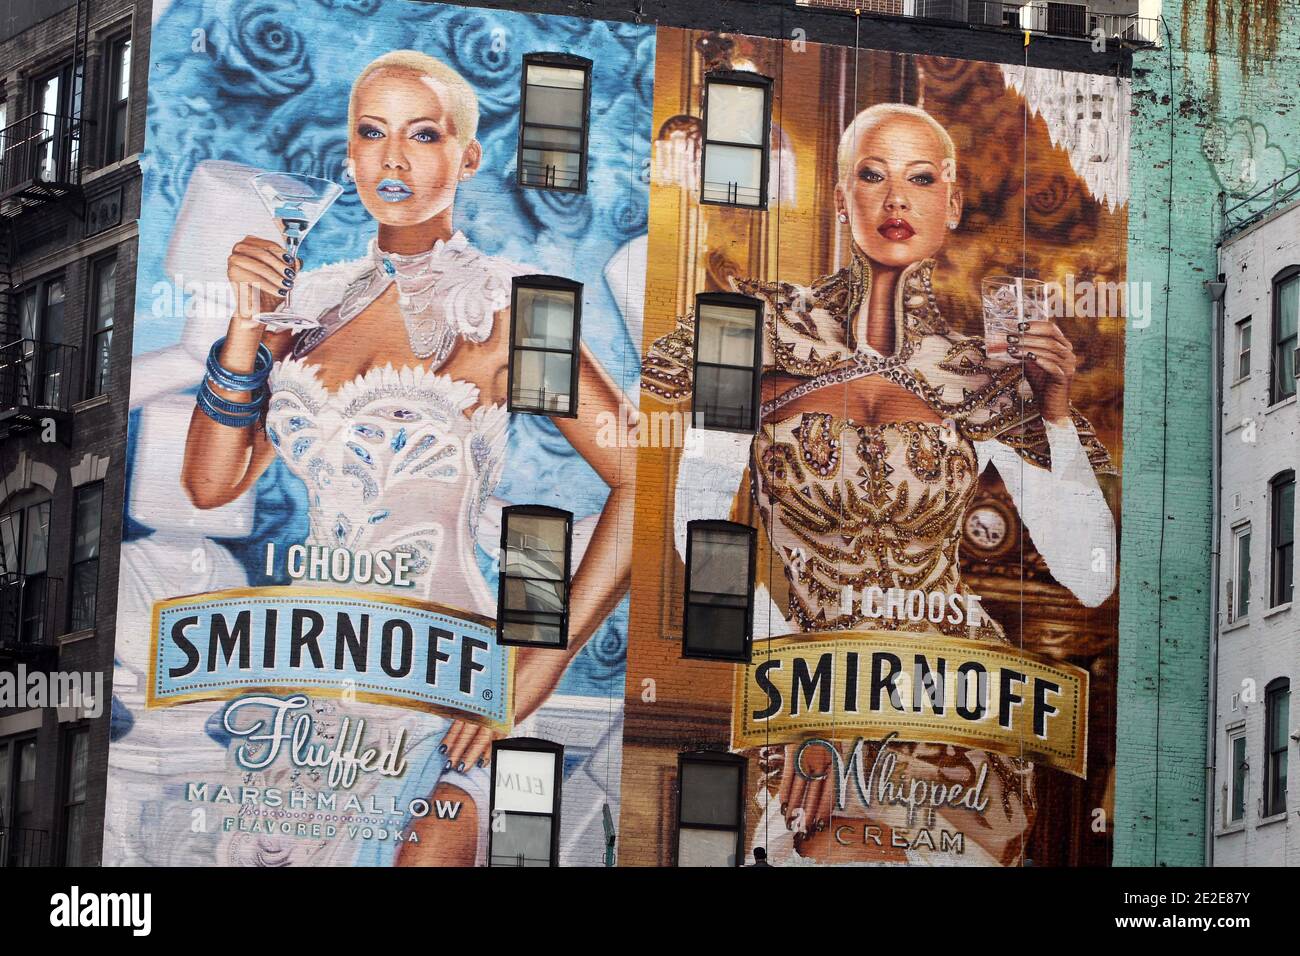 American model and music DJ, Amber Rose appears on huge painted billboards  for Smirnoff Vodka's new advertising campaign, in SoHo, New York City, NY,  USA on November 28, 2011. Photo by Charles